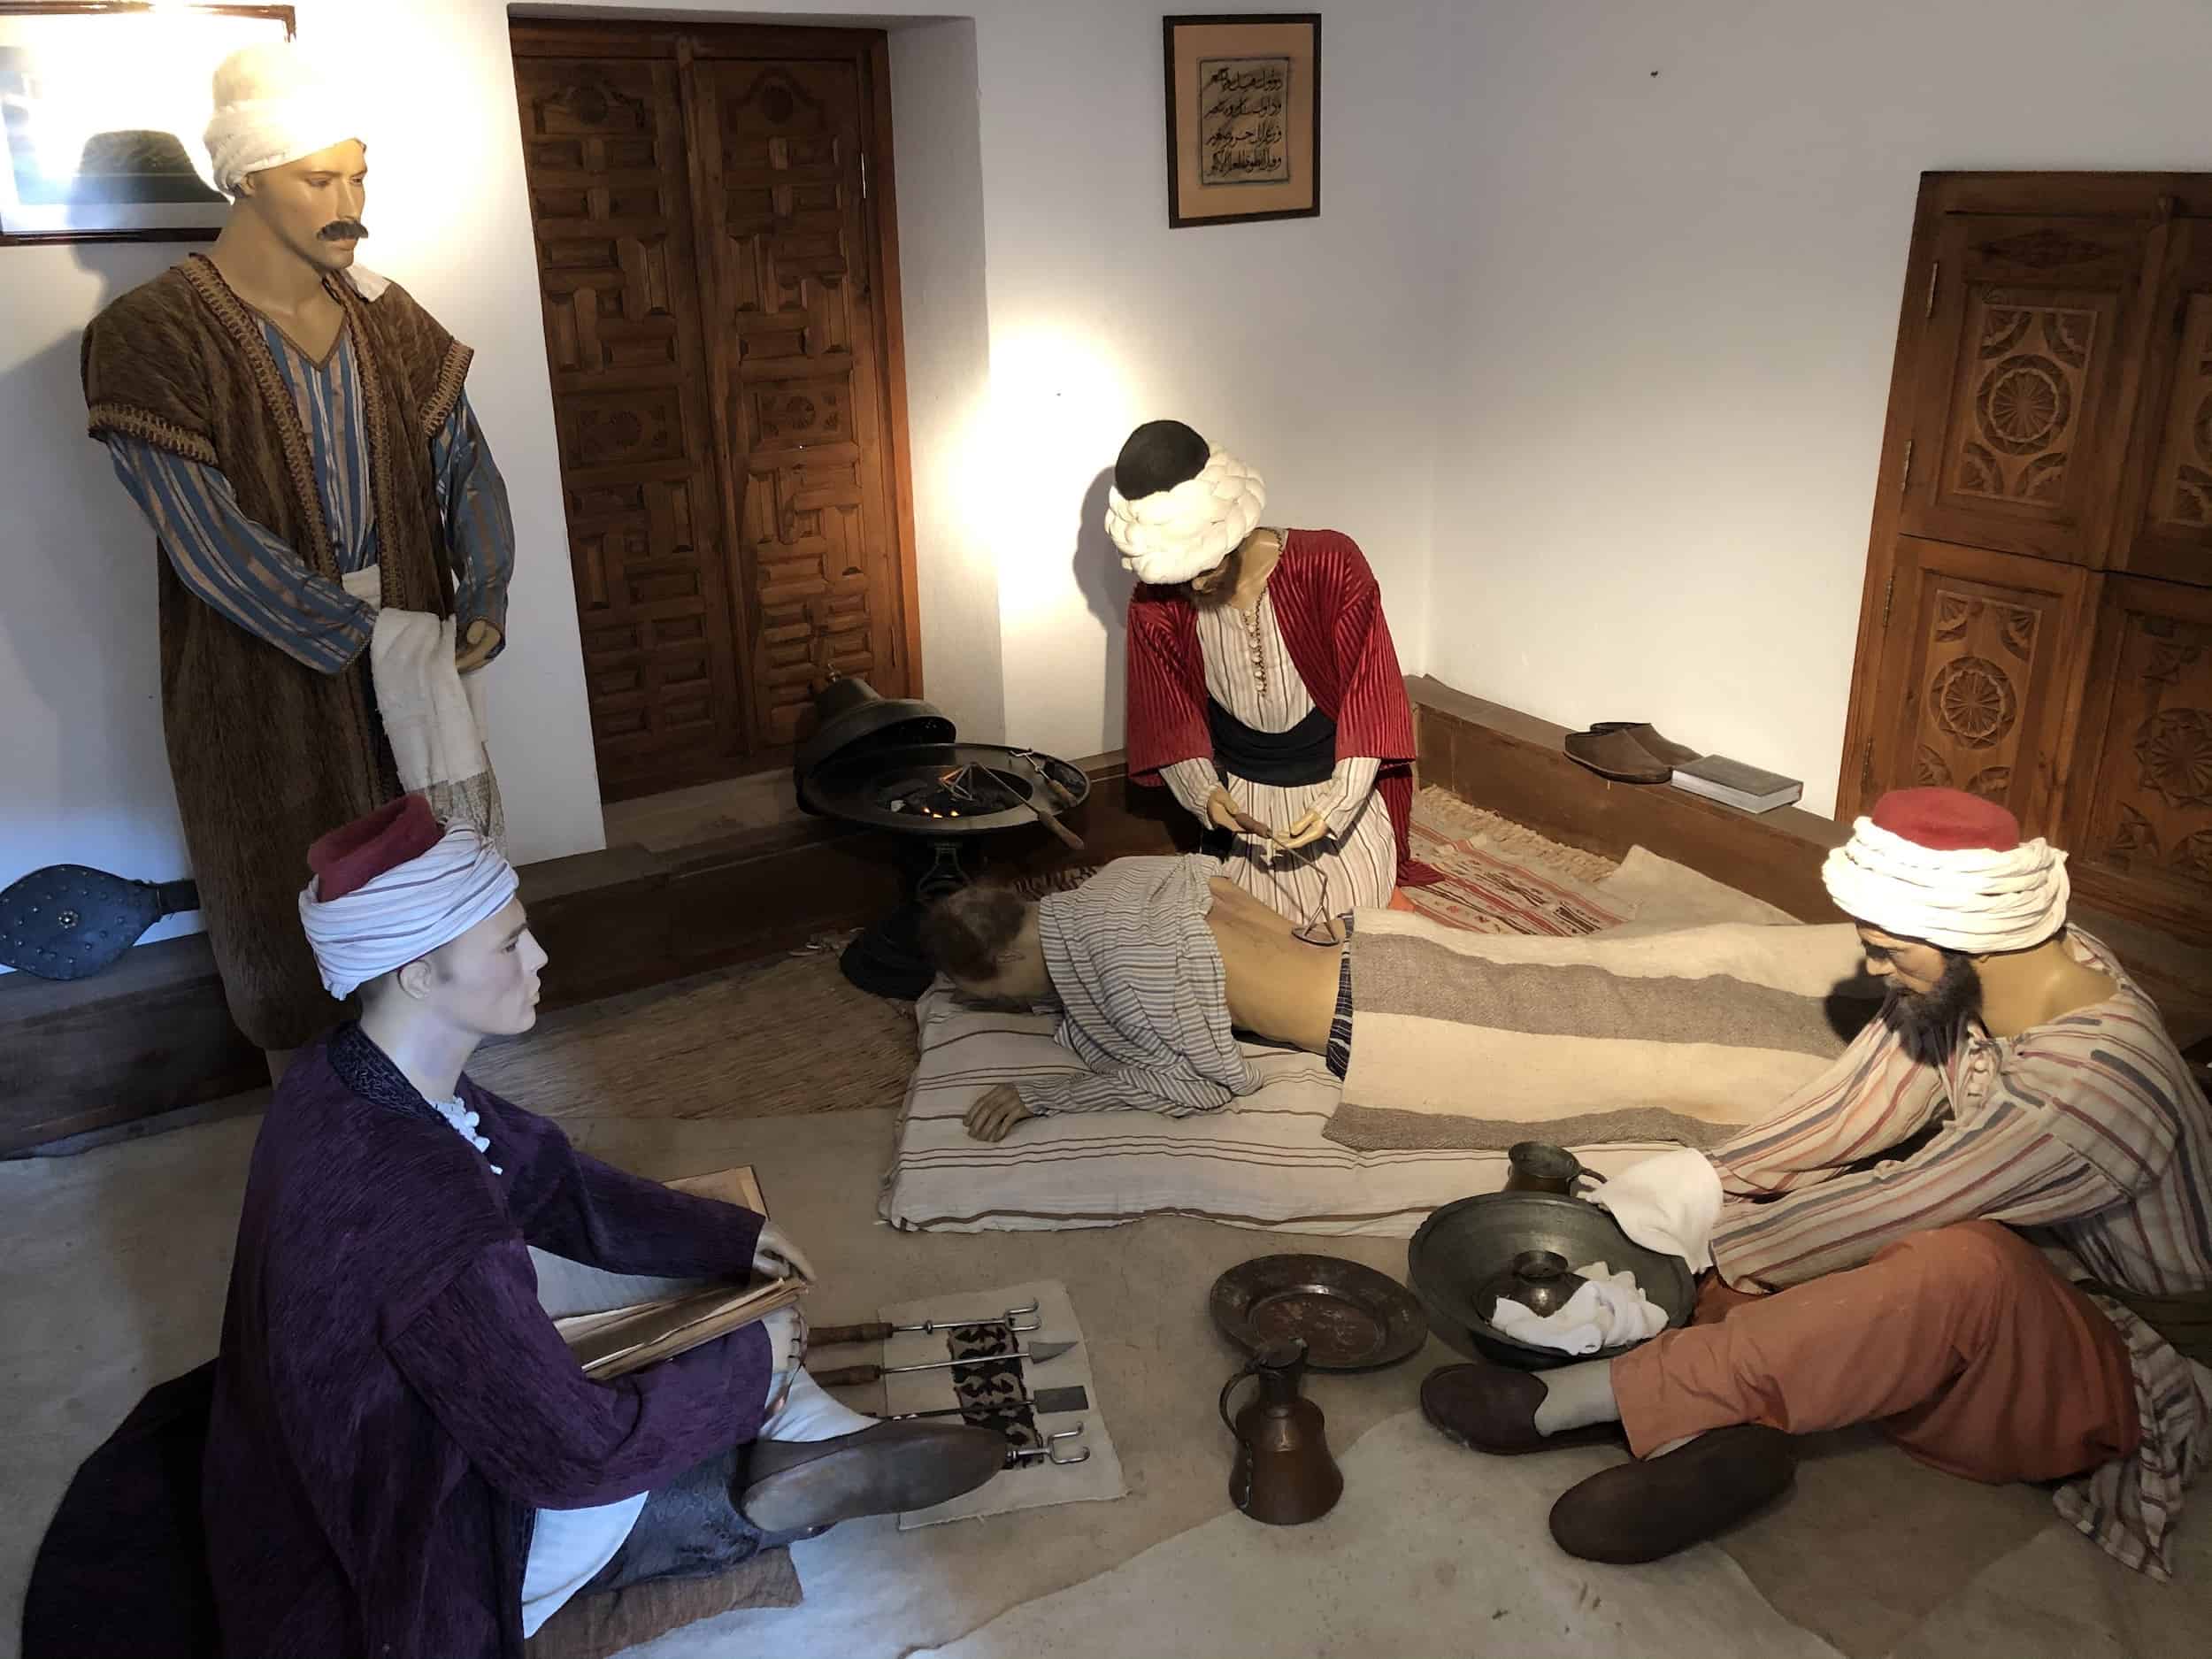 Treatment with cauterization at the Medical School at the Complex of Bayezid II Health Museum in Edirne, Turkey